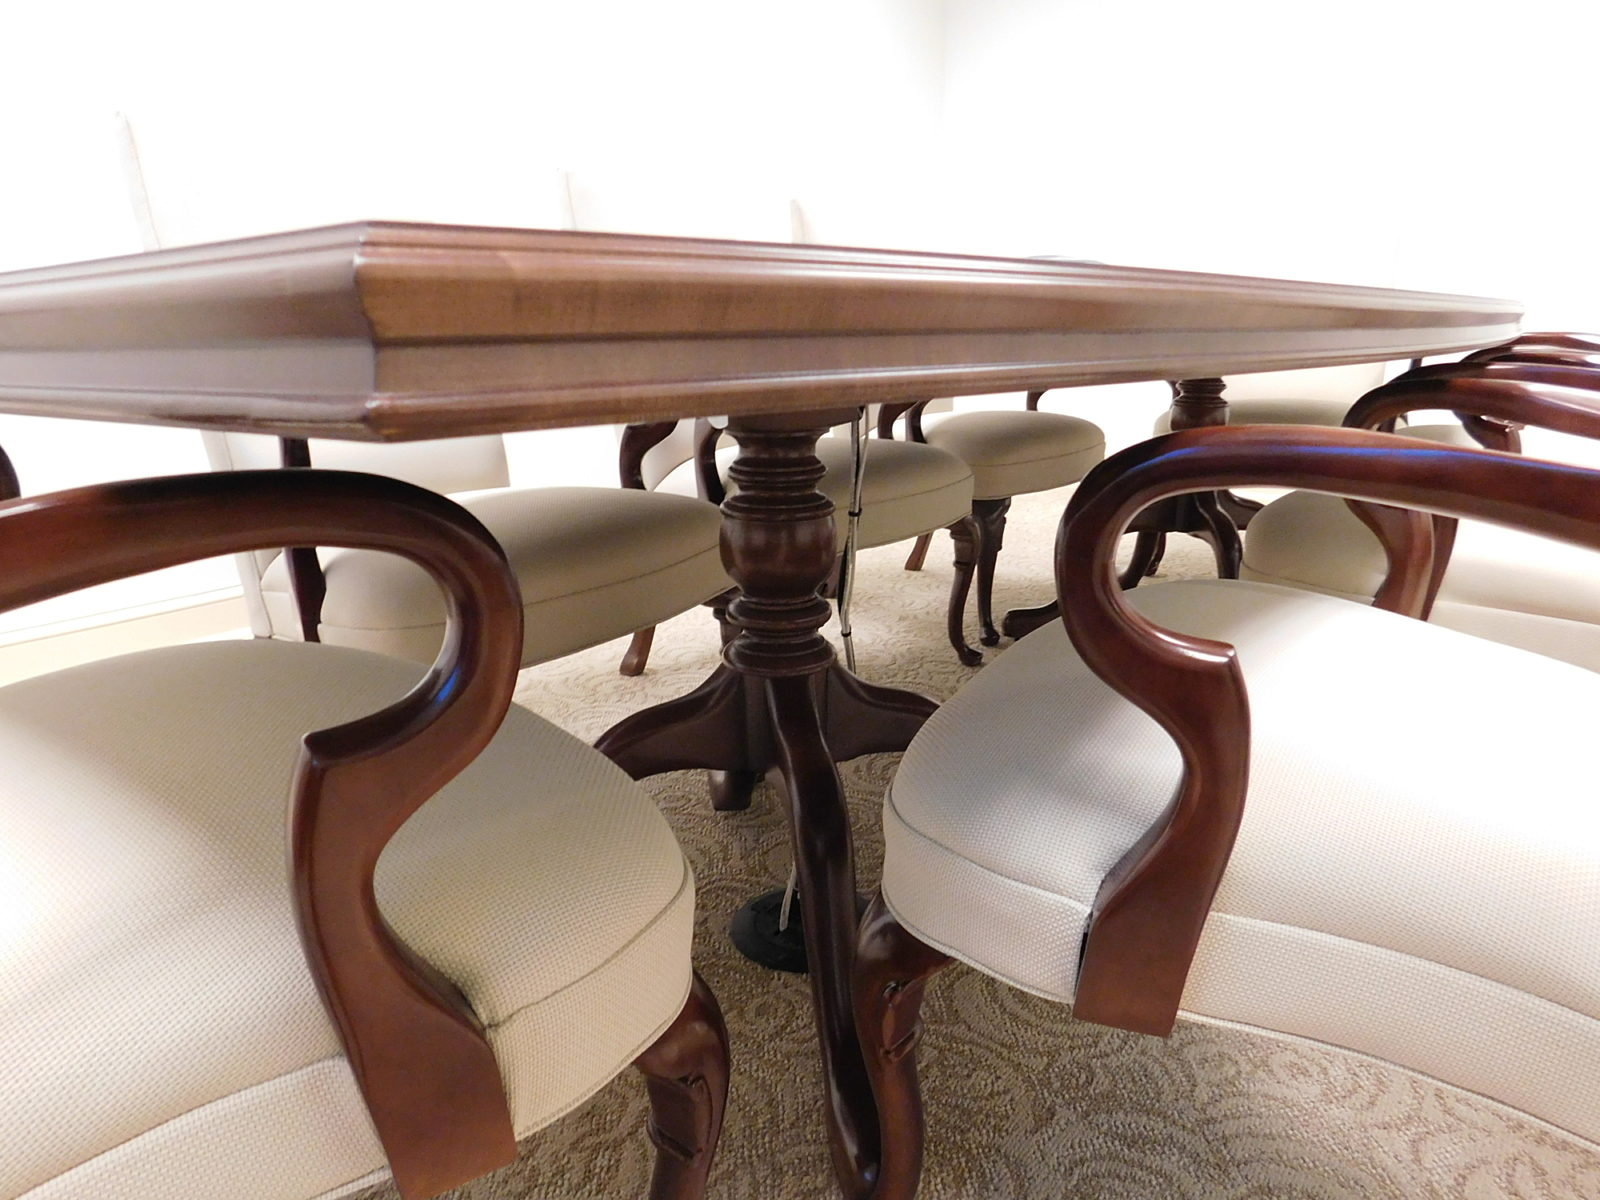 Detail shot of bevel edge of conference table and curved shape of wooden arms on chairs